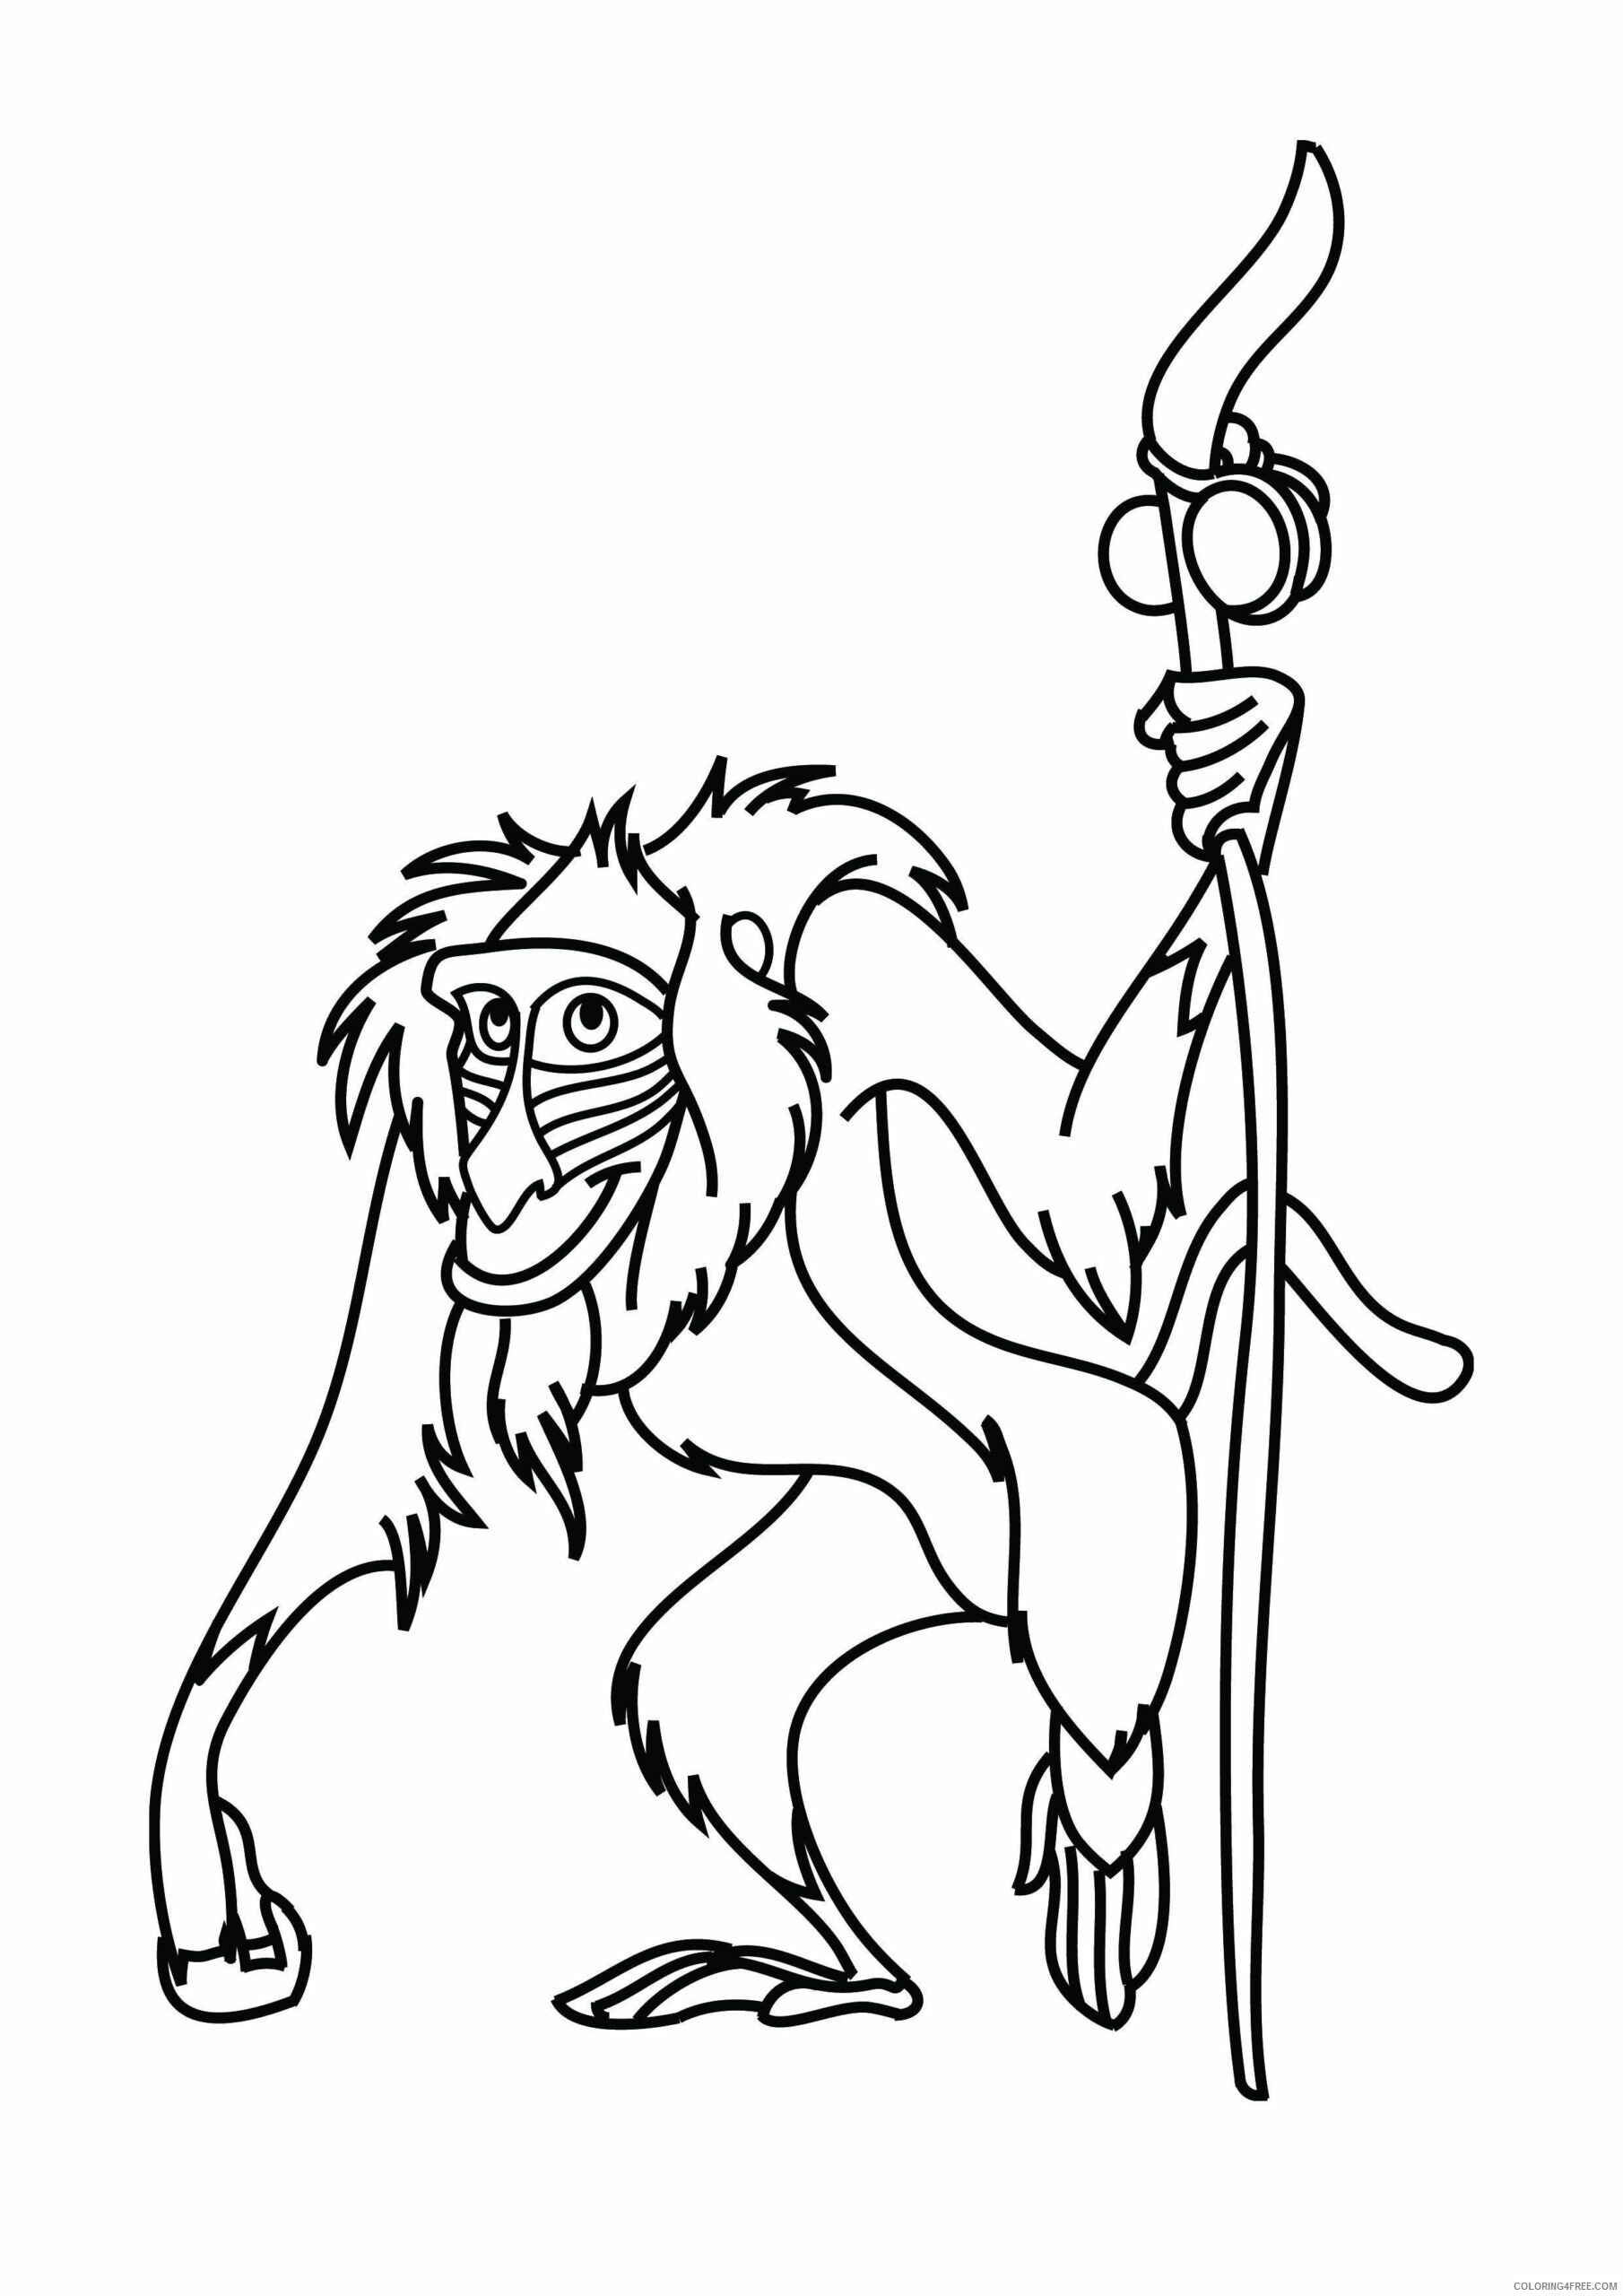 The Lion King Coloring Pages TV Film Printable 2020 09126 Coloring4free